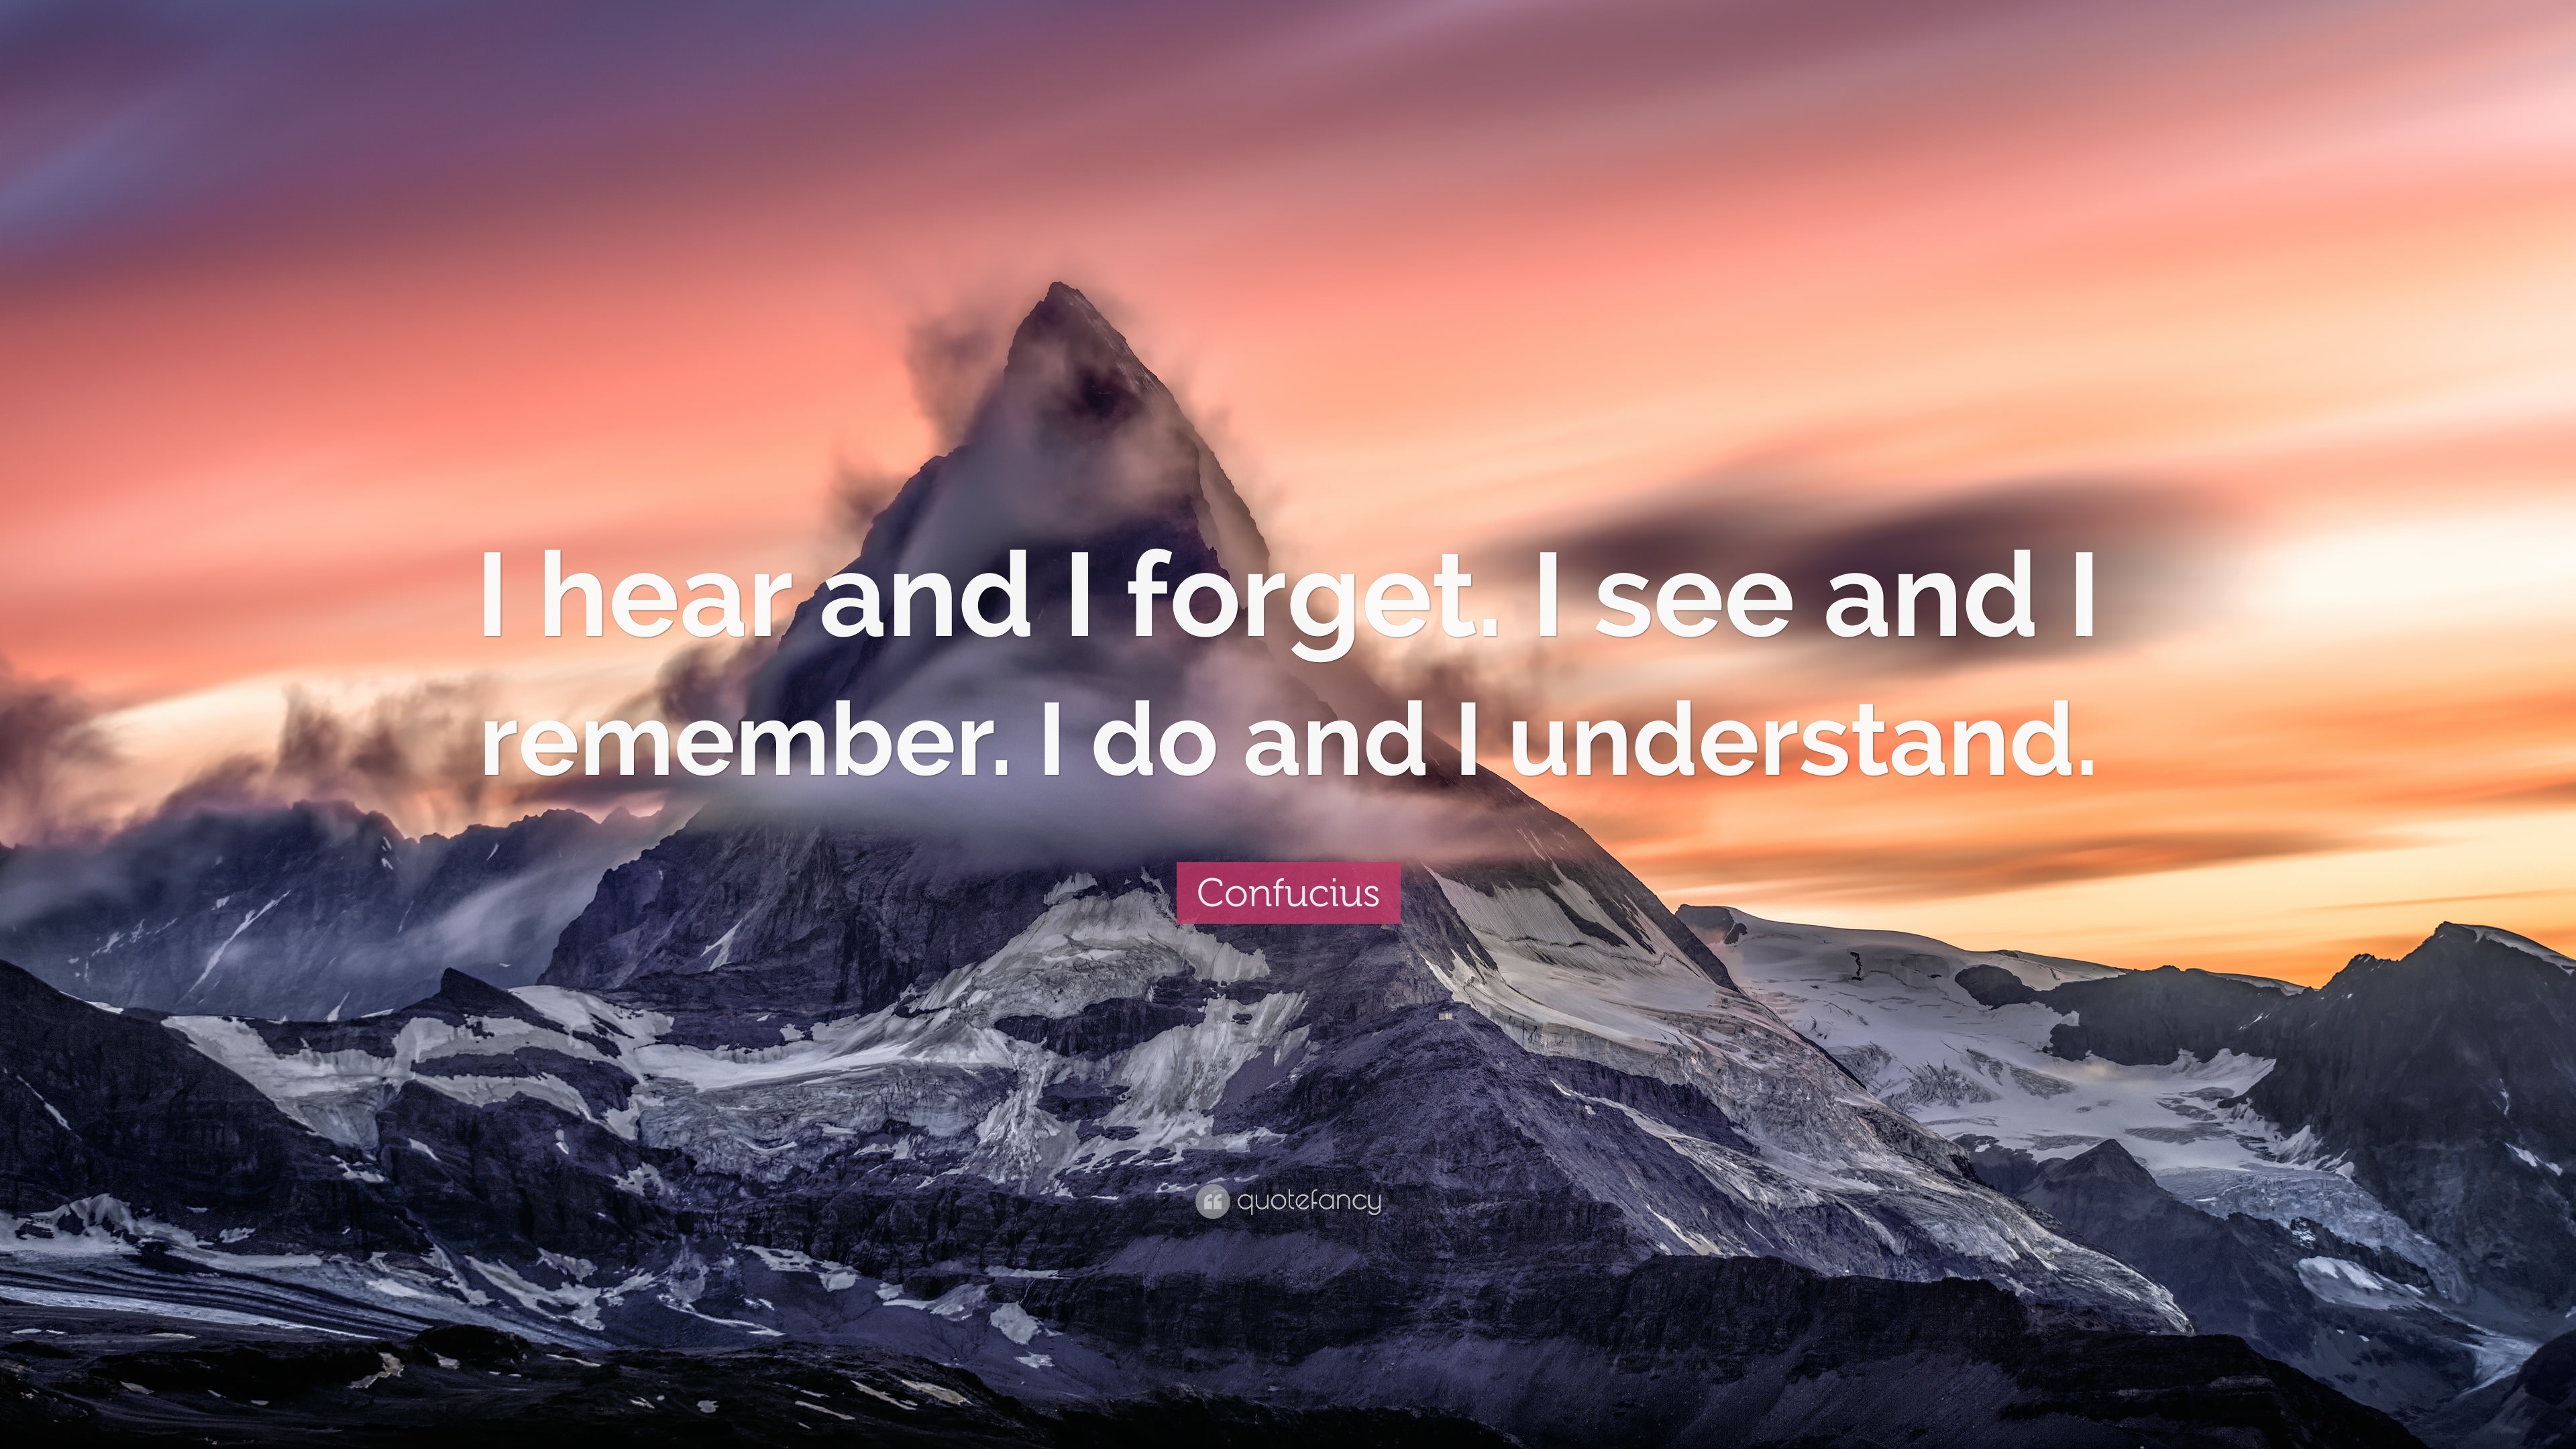 Confucius Quote: “I hear and I forget. I see and I remember. I do and I